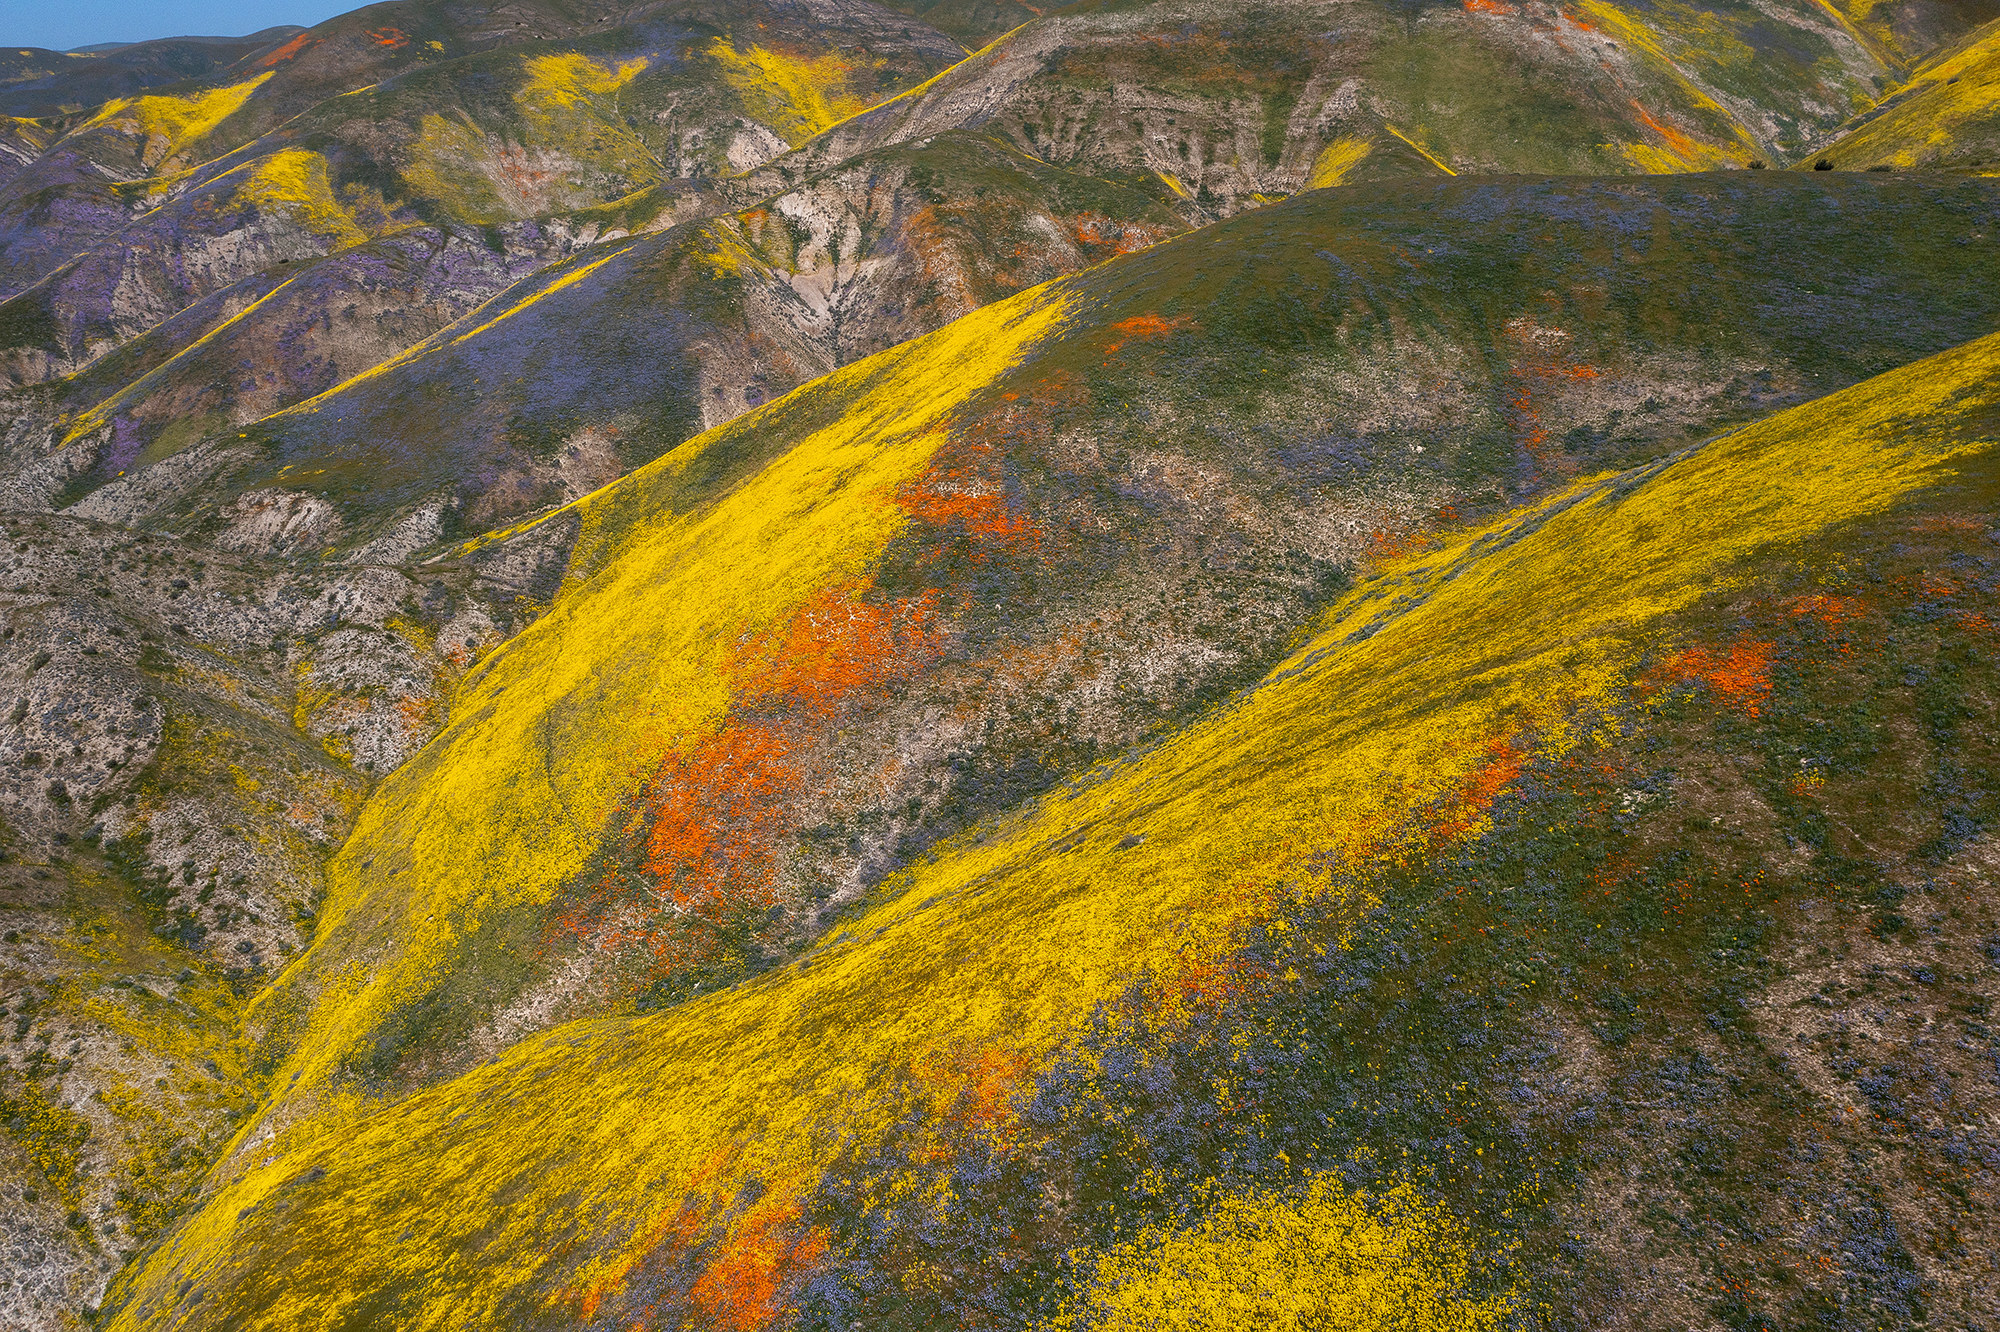 aerial view of a mountain range covered in yellow and orange wildflowers